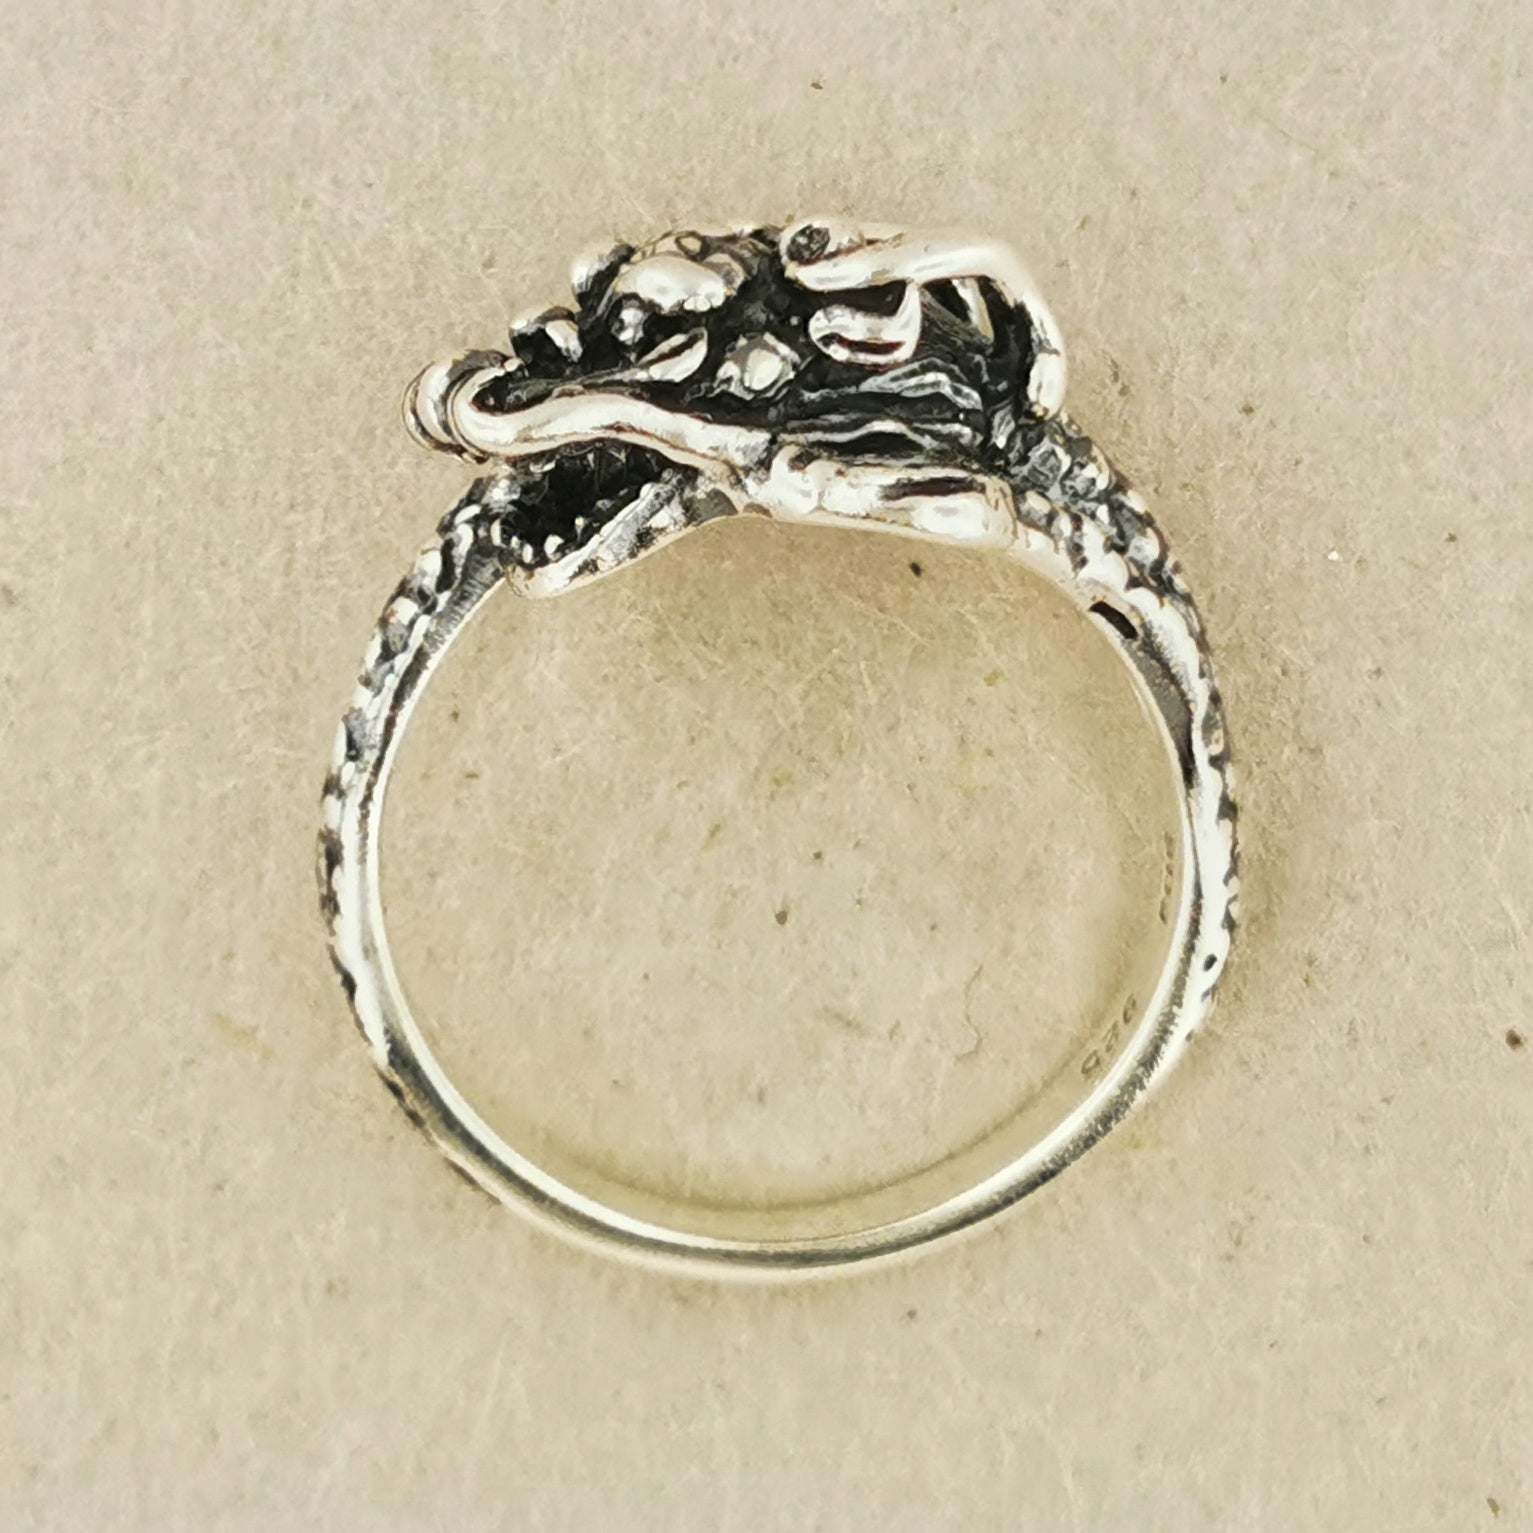 Chinese Dragon Ring in Sterling Silver or Antique Bronze, Sterling Silver Dragon Ring, Silver Dragon Jewelry, Silver Dragon Jewellery, Bronze Dragon Ring, Imperial Dragon Ring, Asian Dragon Ring, Chinese Dragon Ring